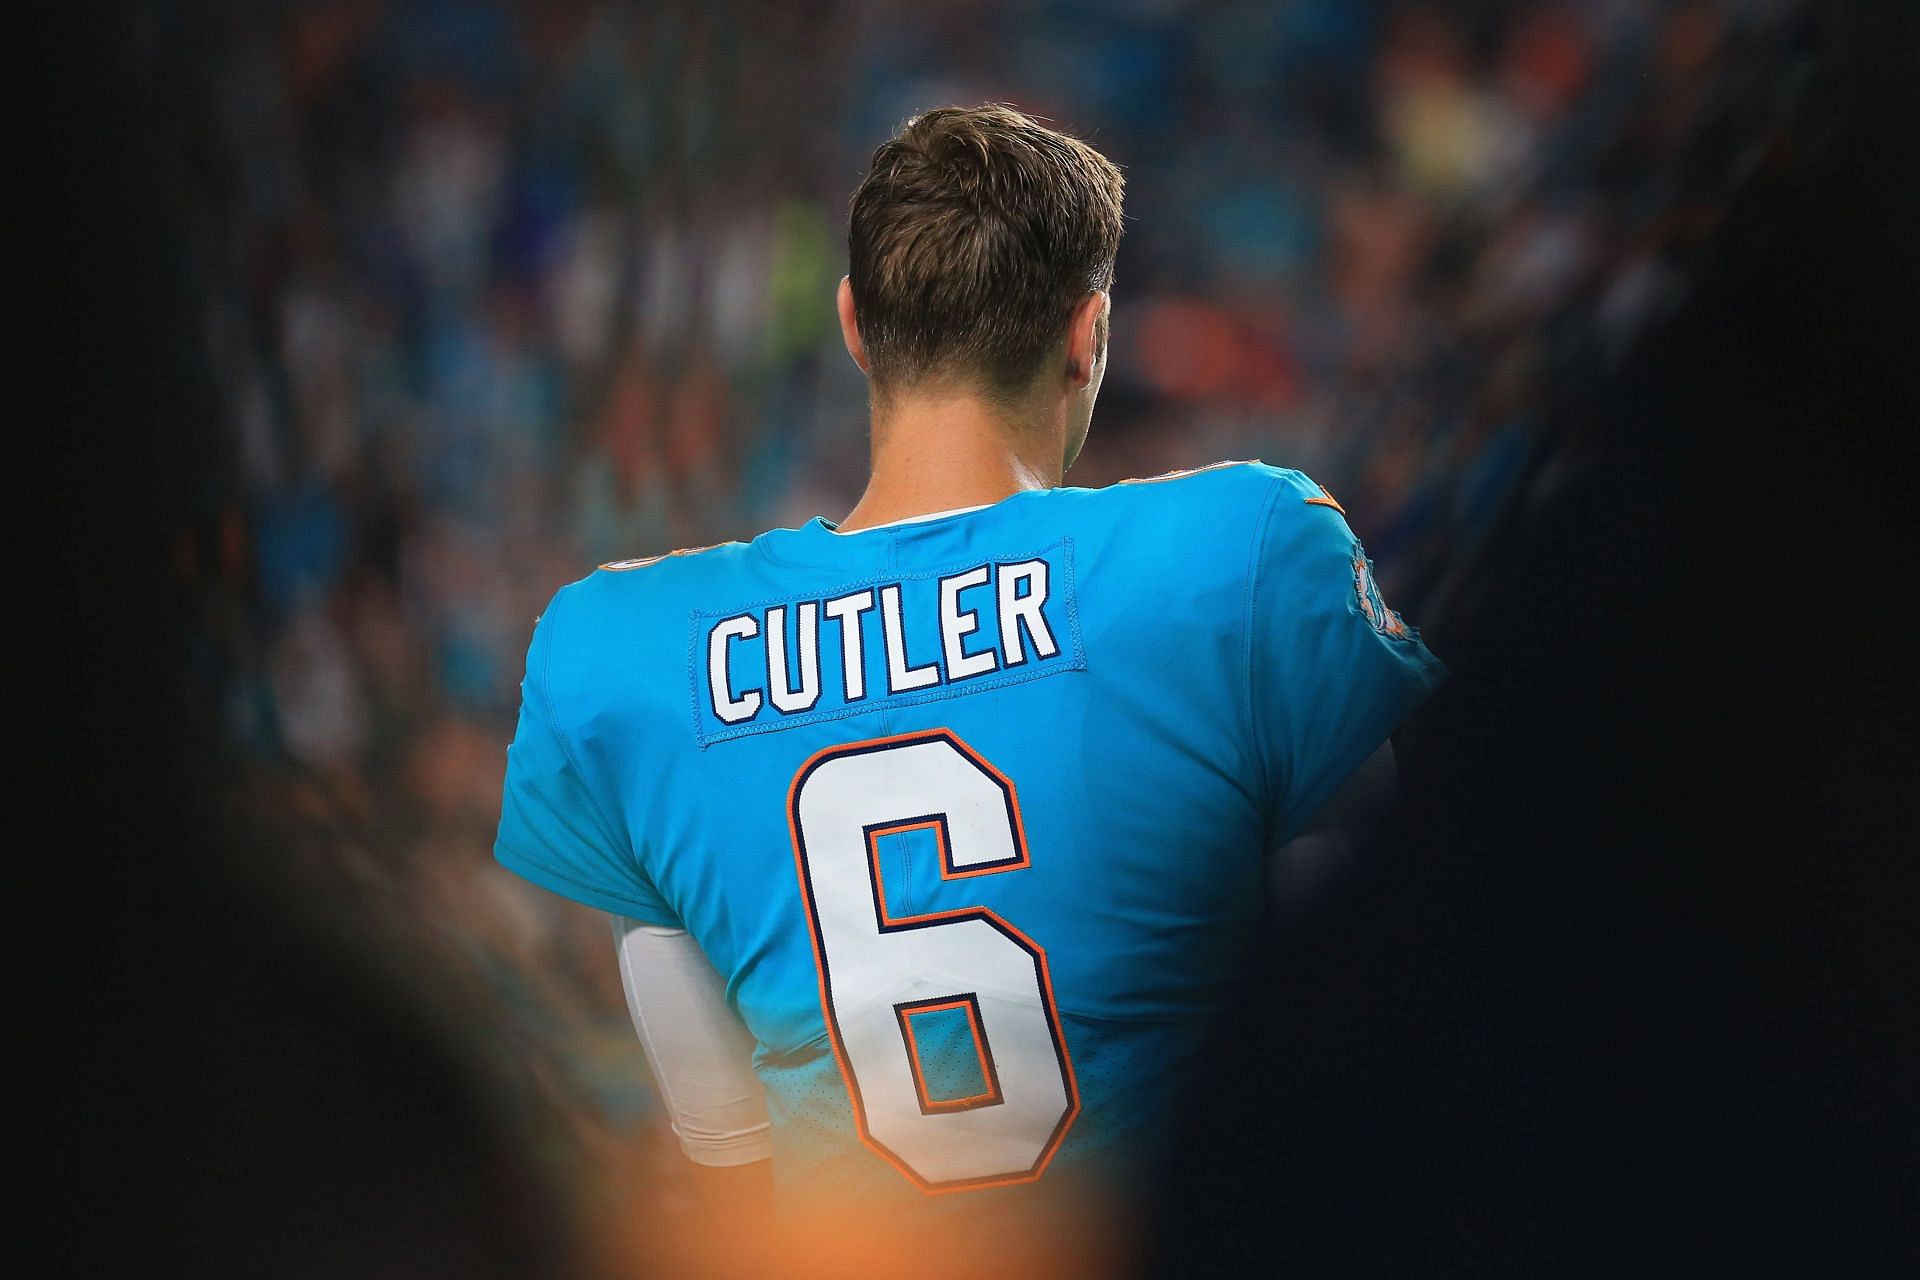 Former NFL quarterback Jay Cutler is in the news for all the wrong reasons